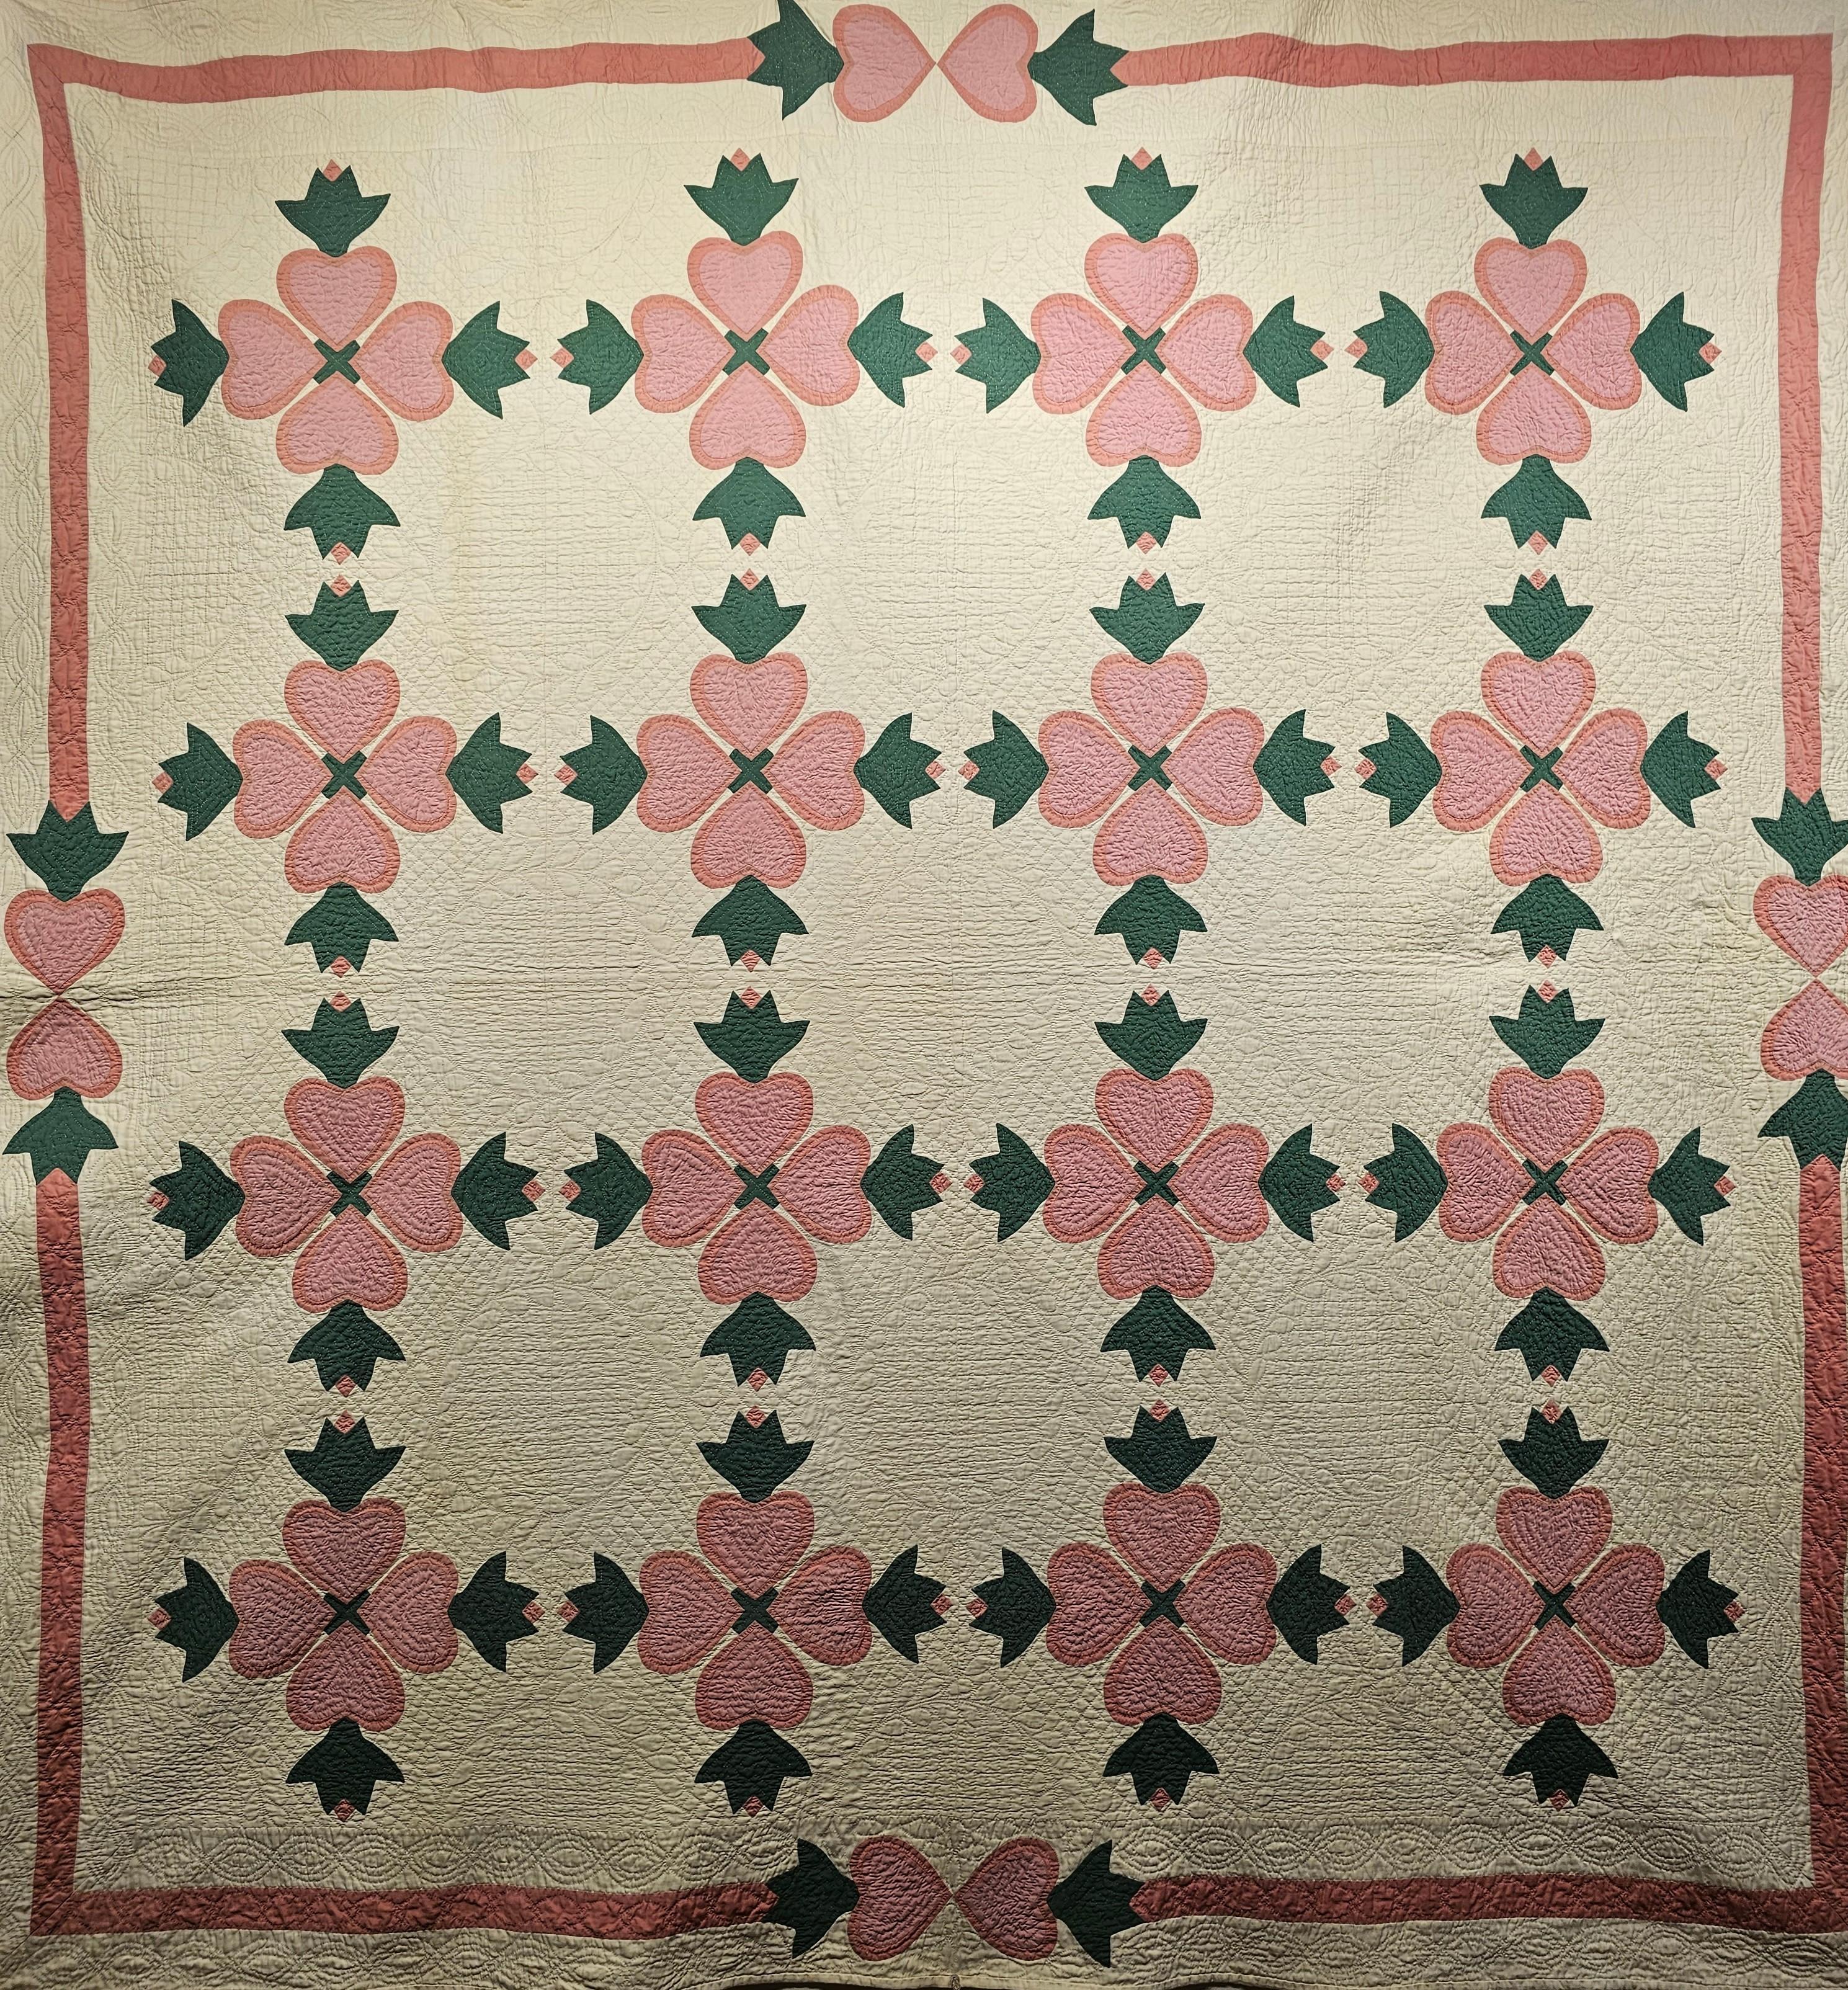 This beautiful American Applique Quilt was hand stitched in the late 1800s in Pennsylvania in the United States. The American Applique Quilt is in a “Hearts and Tulips” pattern with pink hearts with green tulips on an ivory background.  The quilt